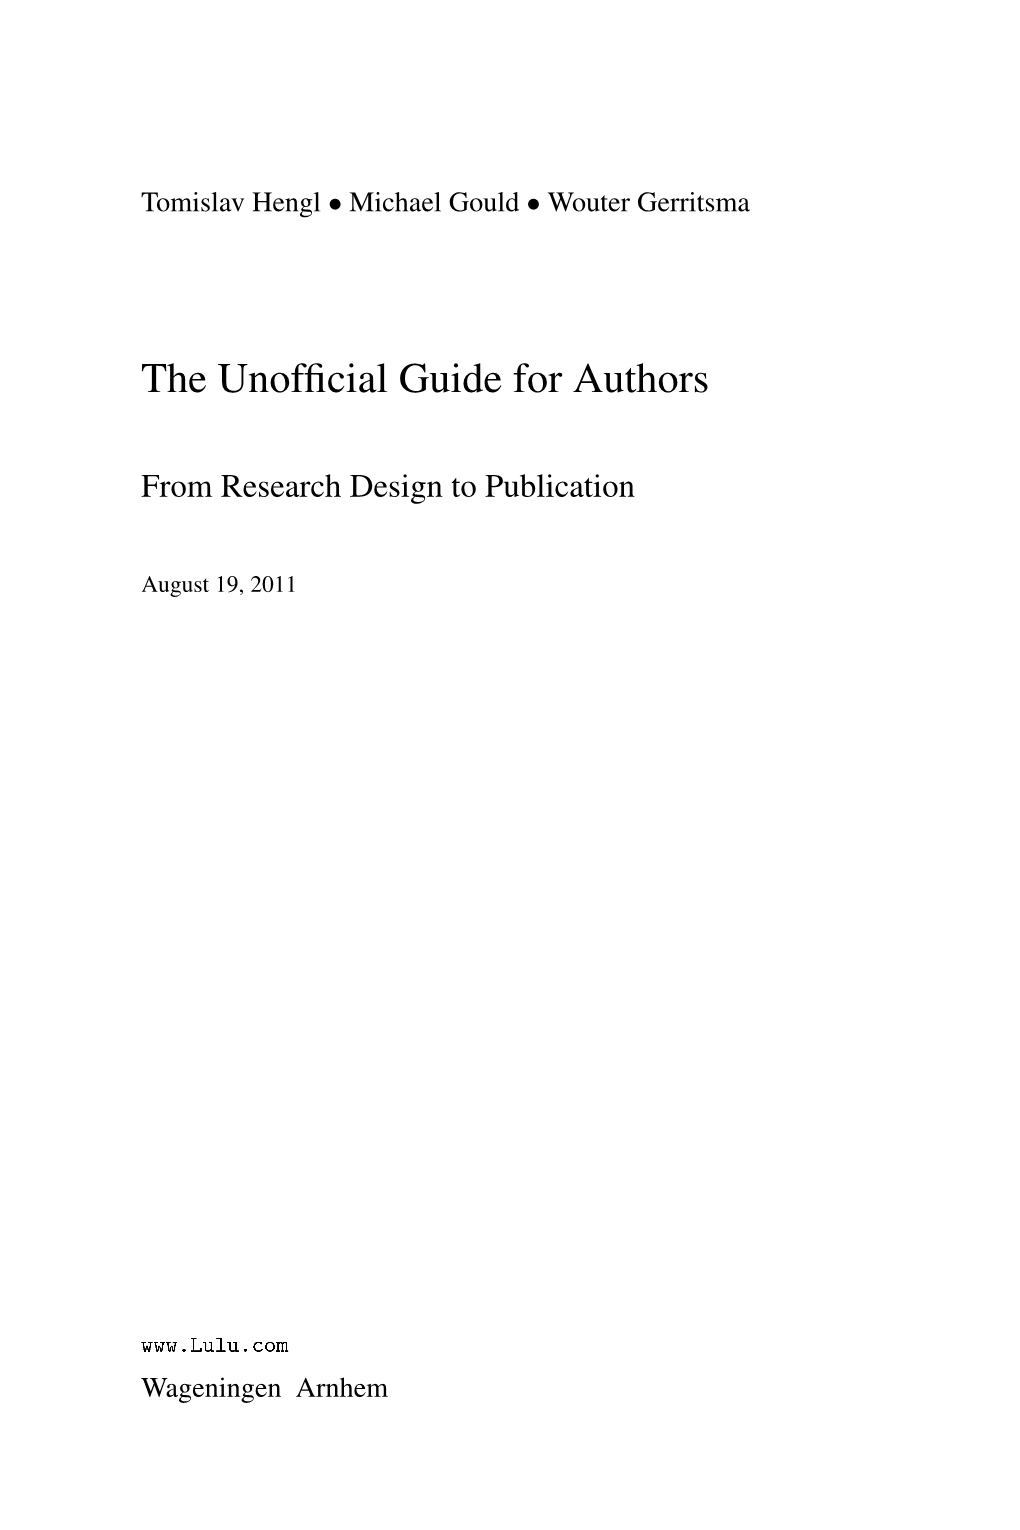 The Unofficial Guide for Authors